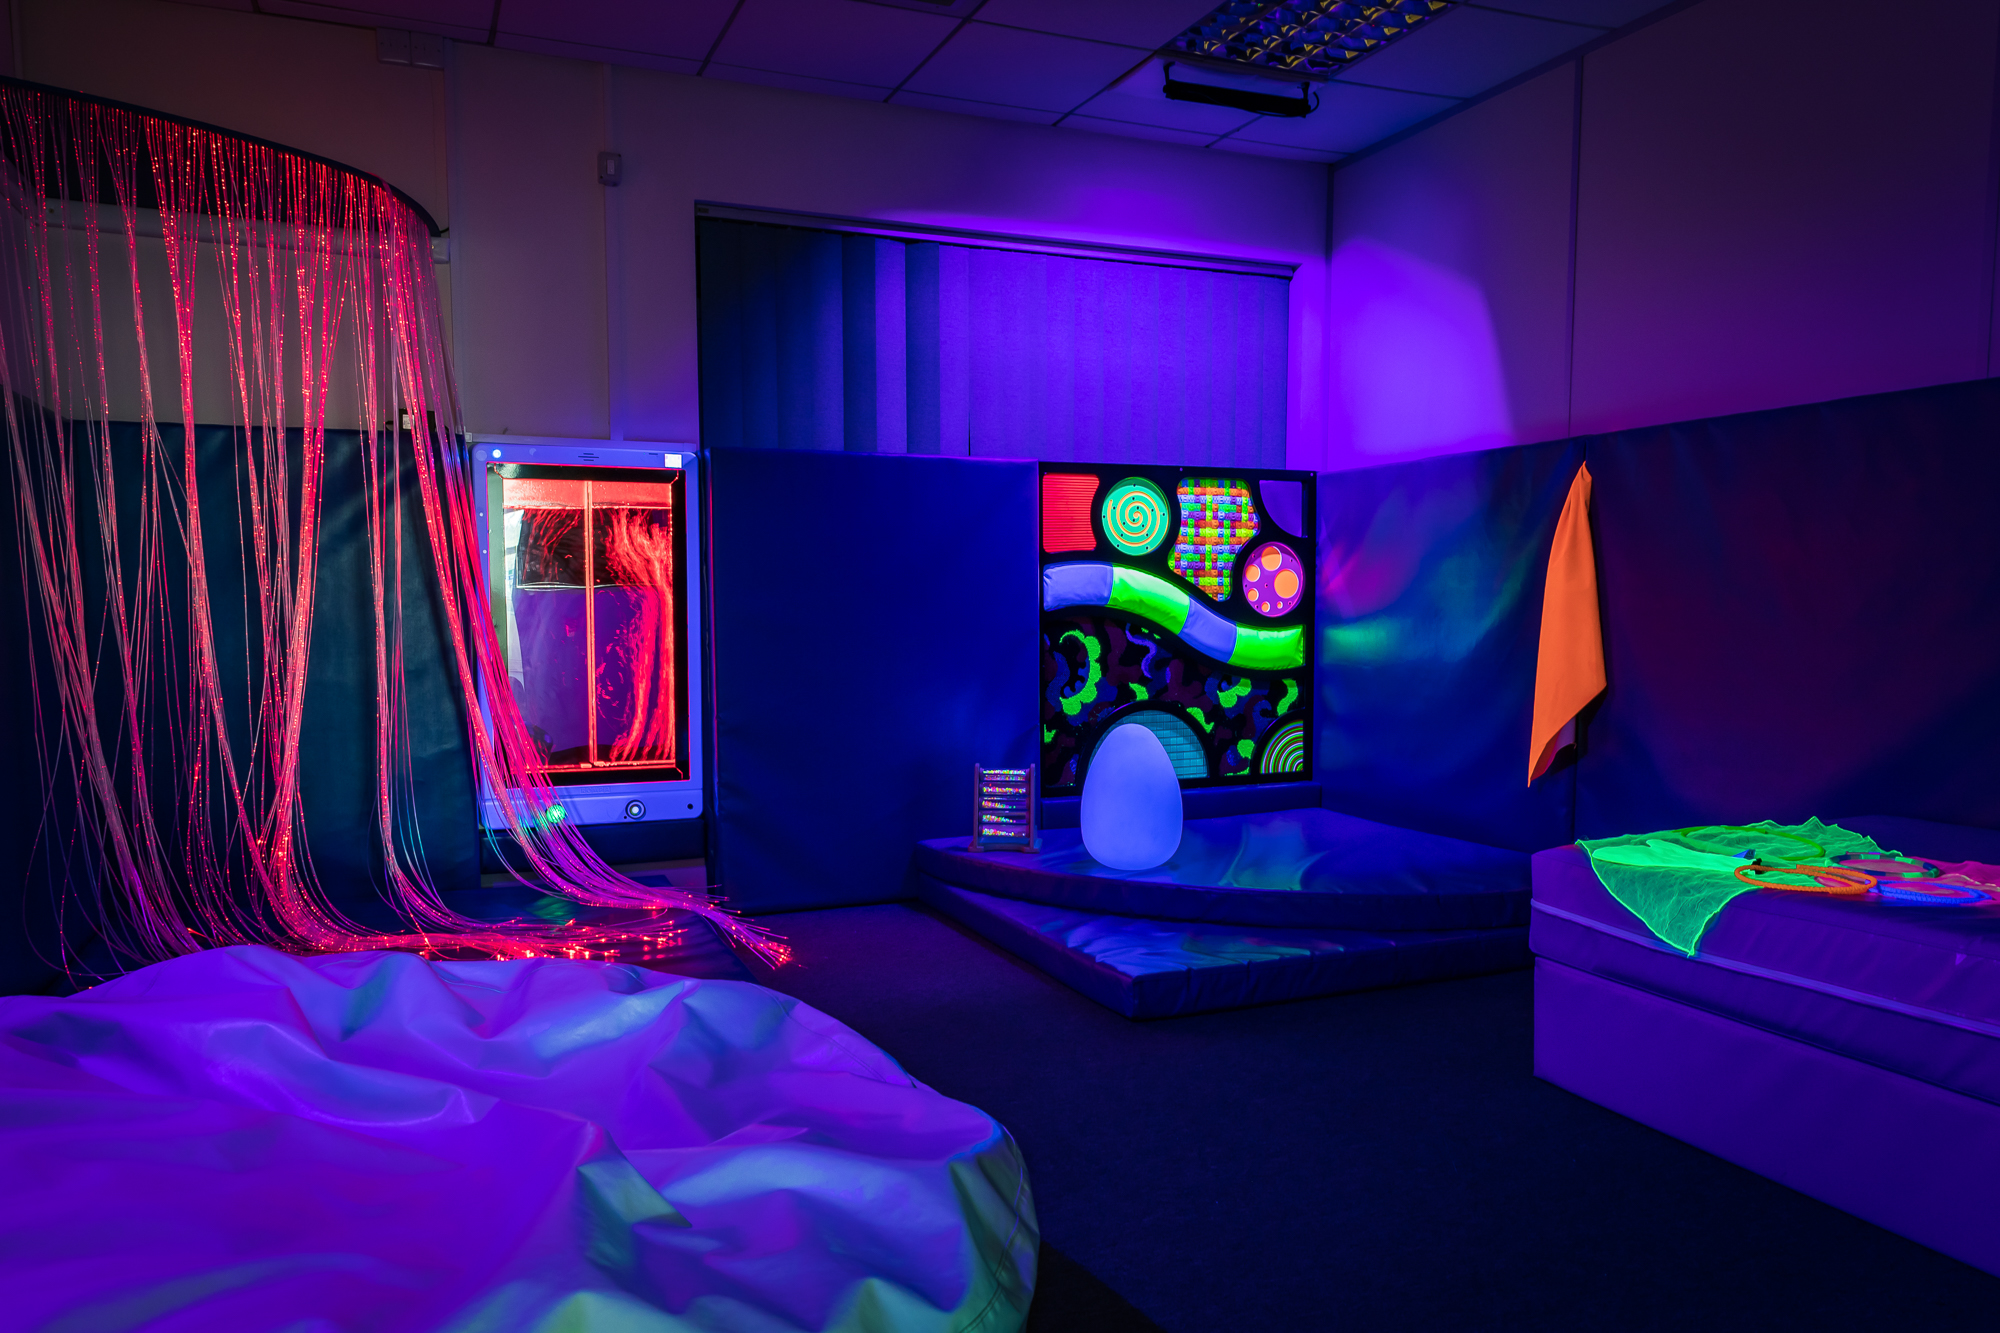 What Makes a Great Sensory Room?